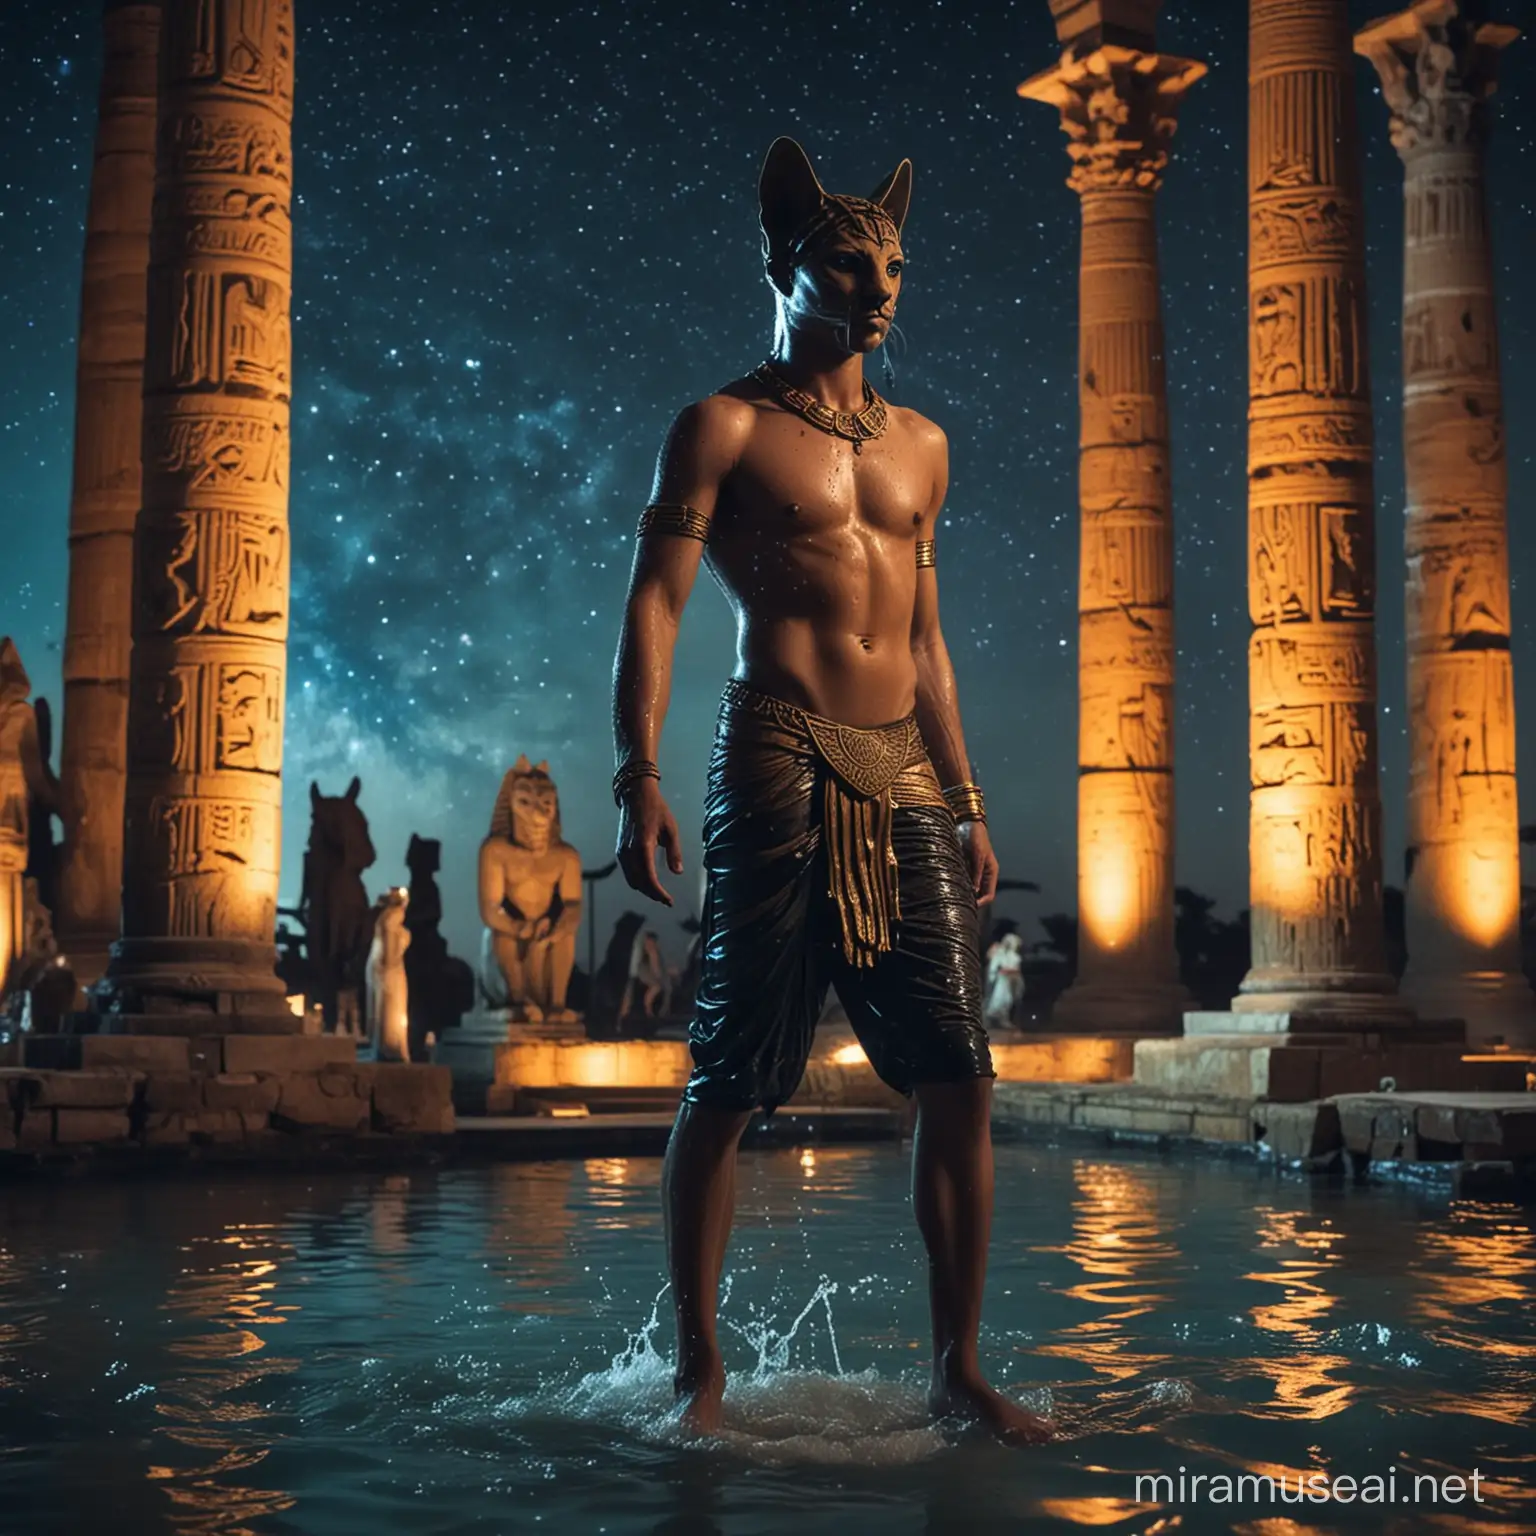 Muscular Teen Dancing at Bastet Statue in Egyptian Temple Oasis